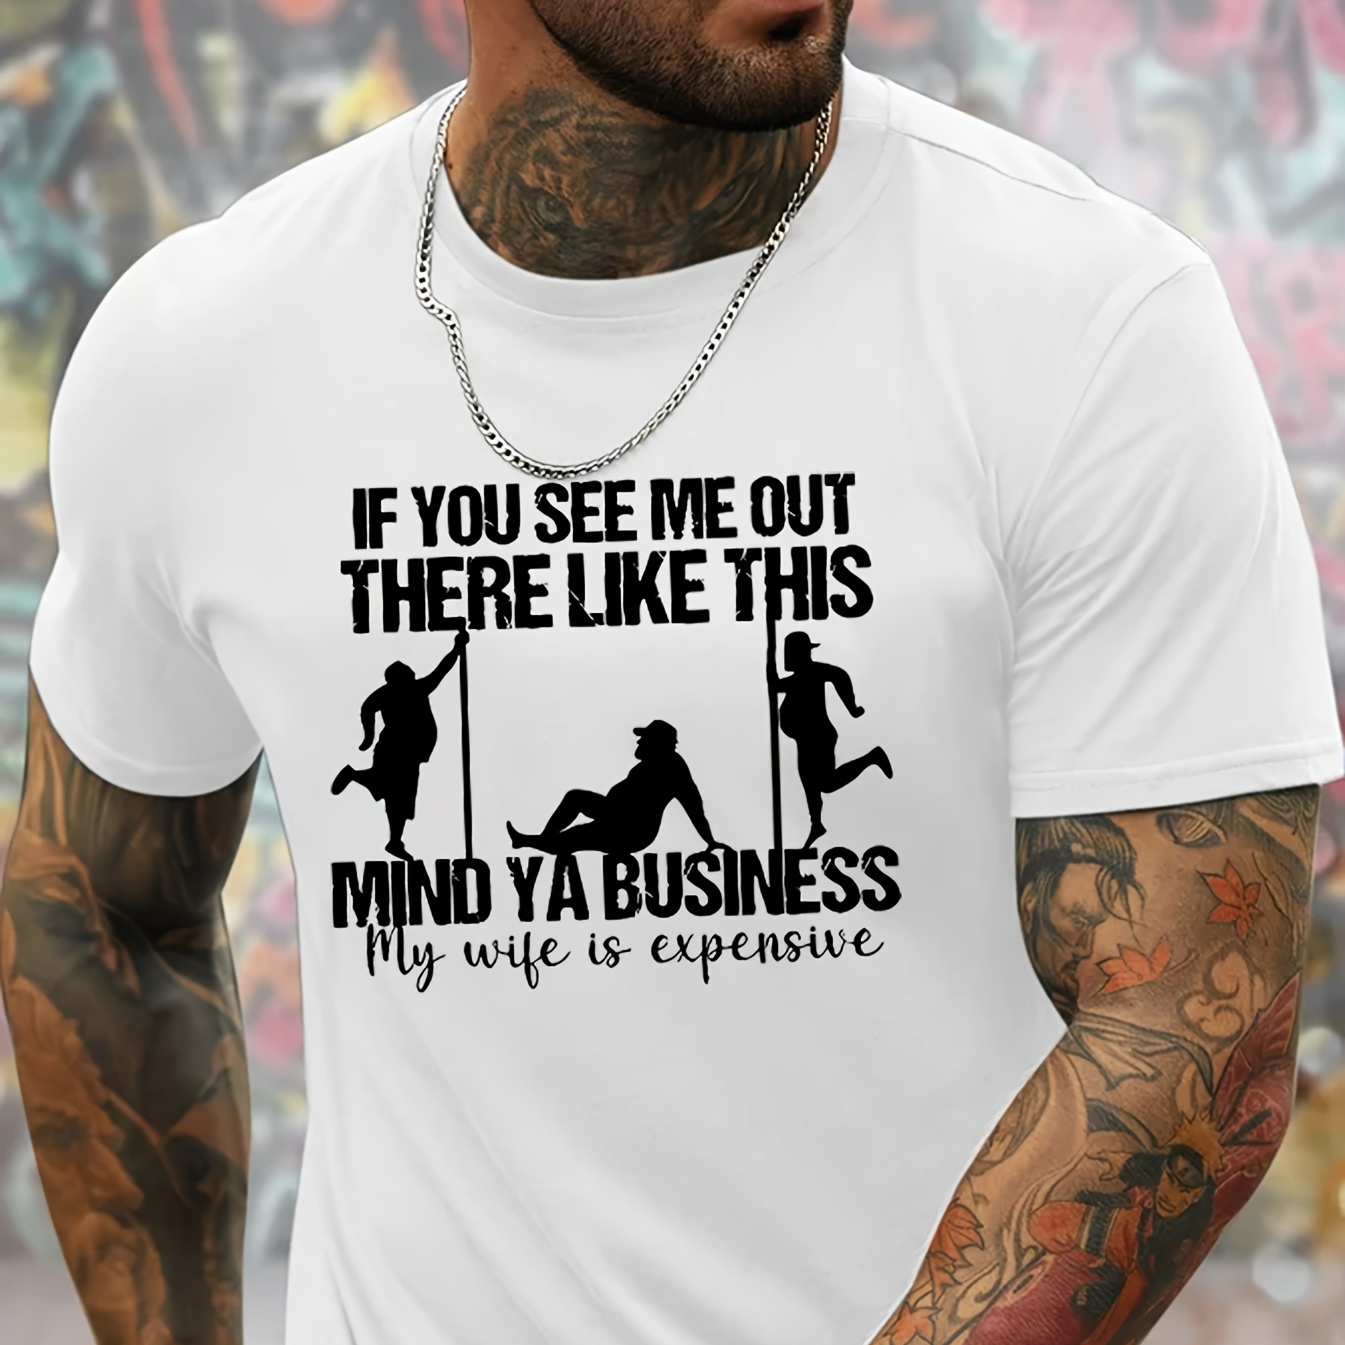 

If You See Me Out There Like This And 3 Men Graphic Print, Men's Novel Graphic Design T-shirt, Casual Comfy Tees For Summer, Men's Clothing Tops For Daily Activities